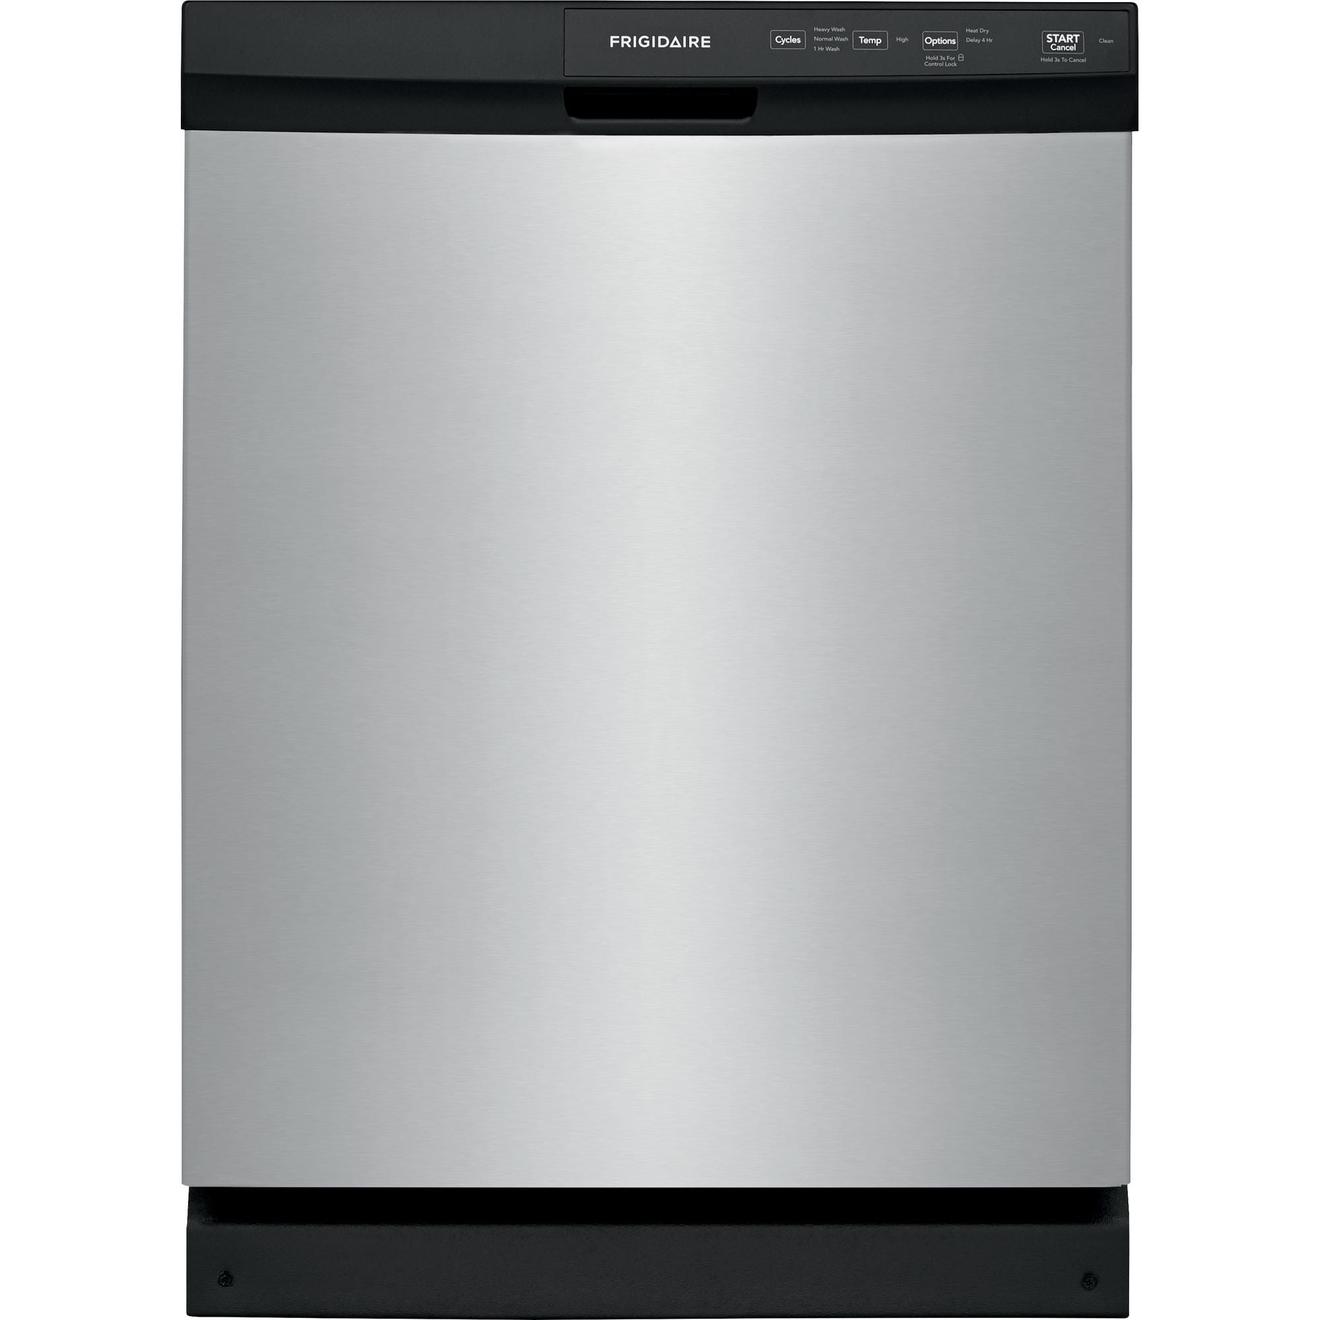 Frigidaire 3 Cycle Dishwasher with Front Controls offers at $449.98 in Trail Appliances